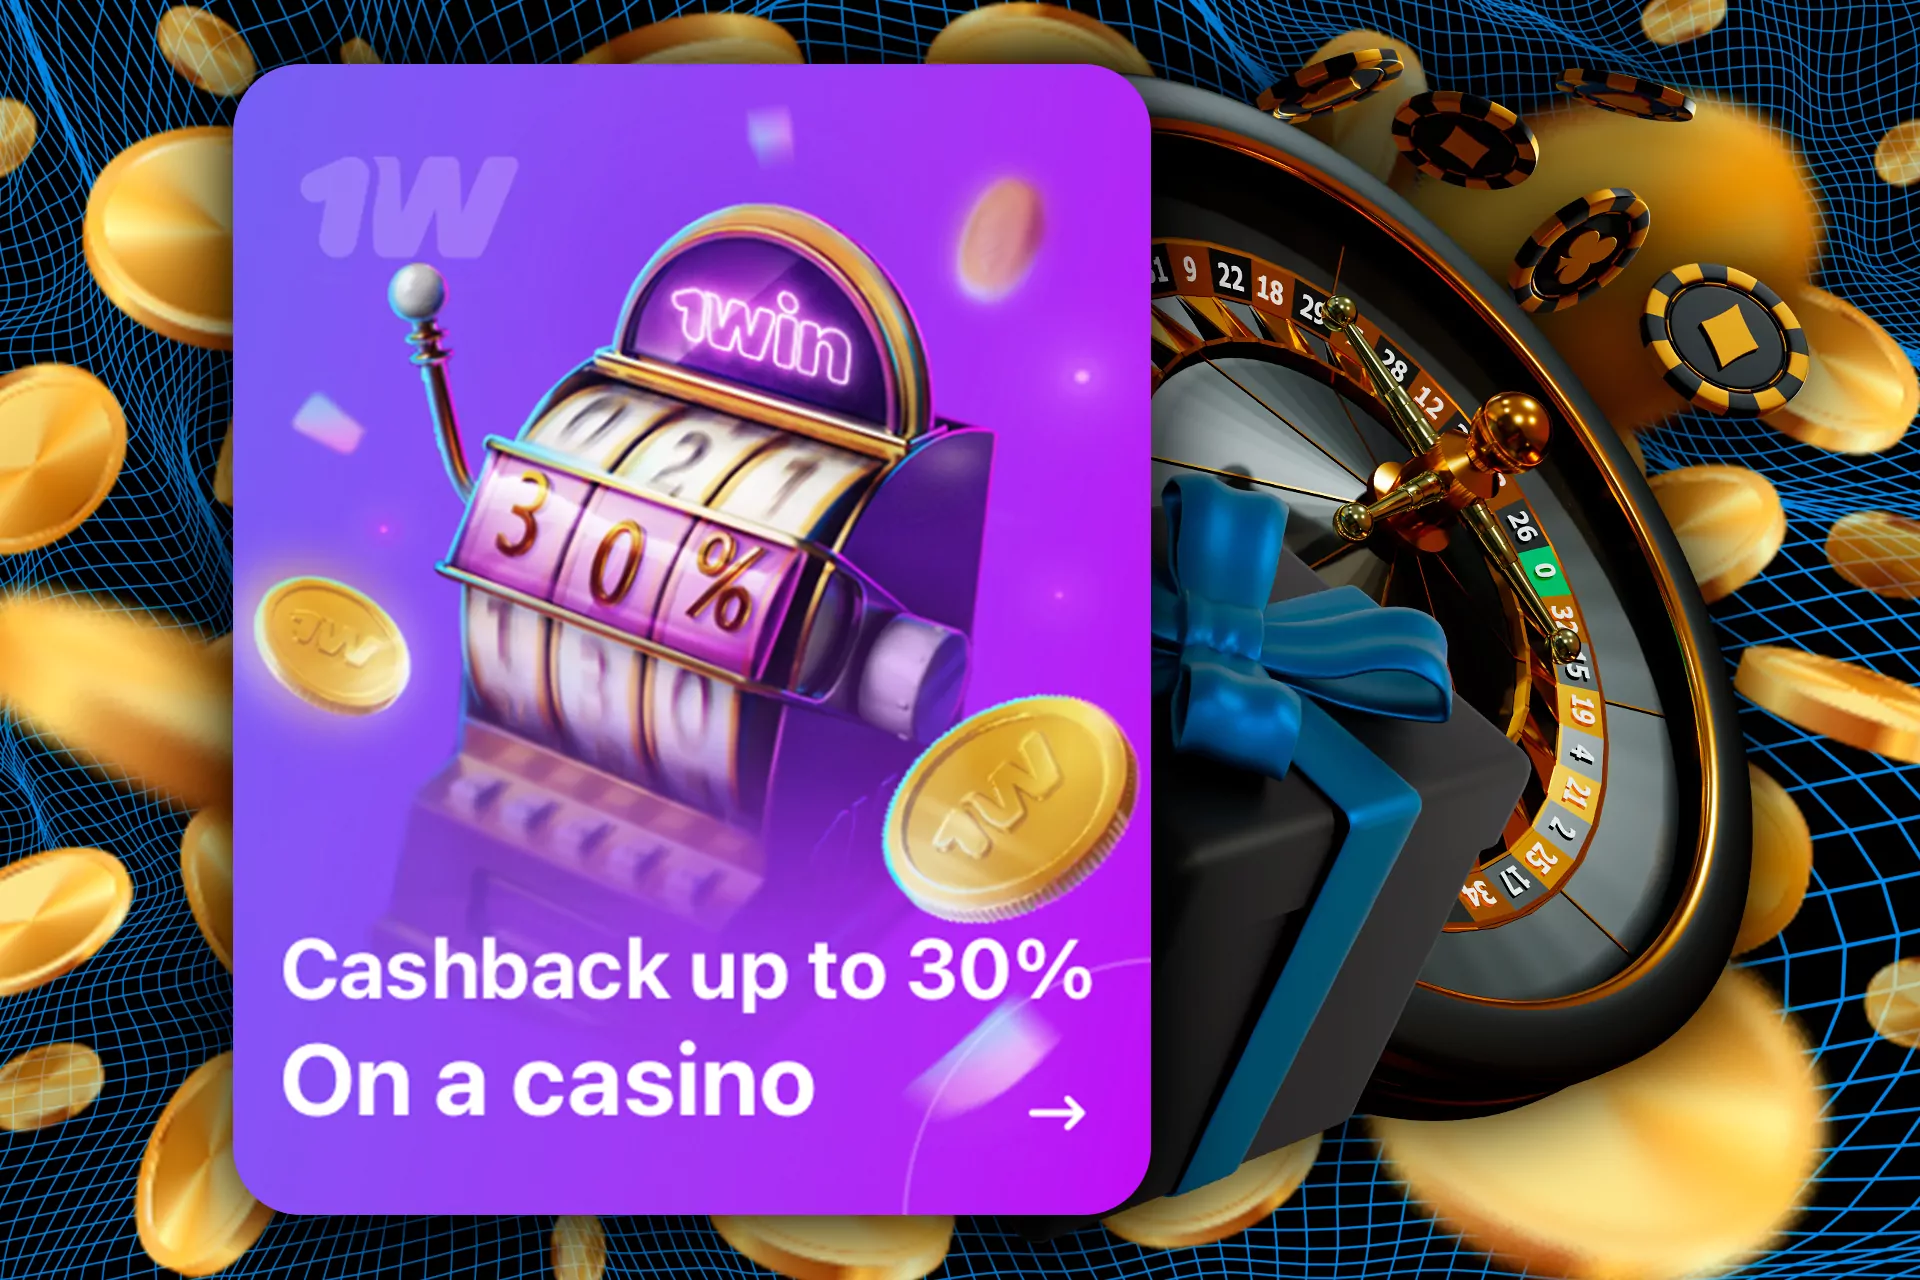 If you are a regular player in the 1win Casino, don't miss the chance to get a cashback.